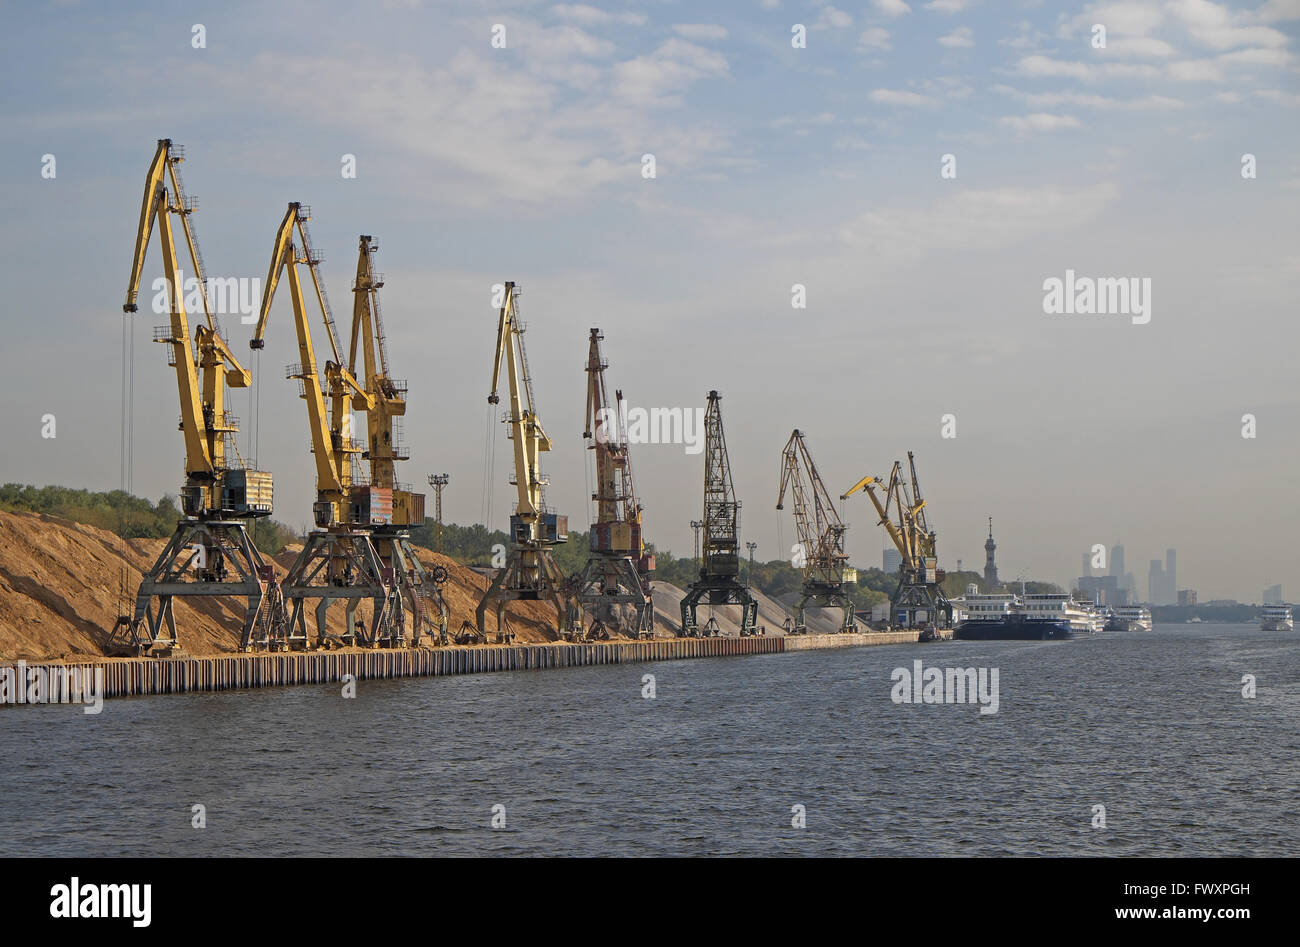 Cranes on river bank of Moskva River, northern outskirts of Moscow, Russia. Stock Photo